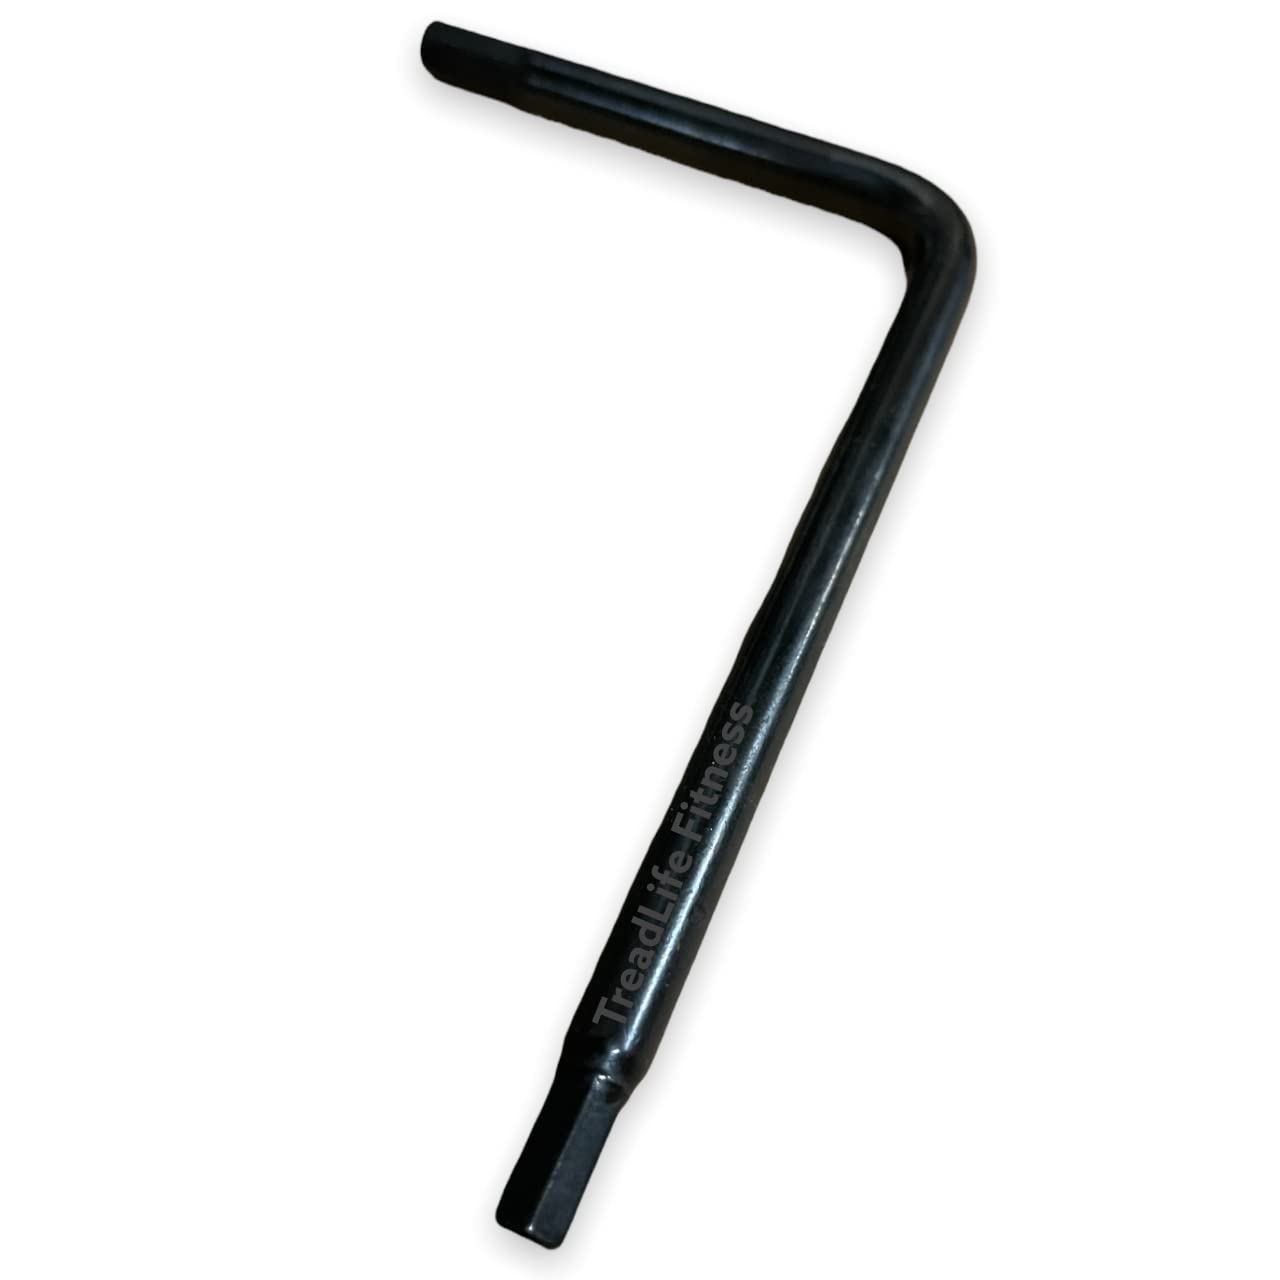 TreadLife Fitness Treadmill Allen Wrench - Replacement for NordicTrack Treadmills